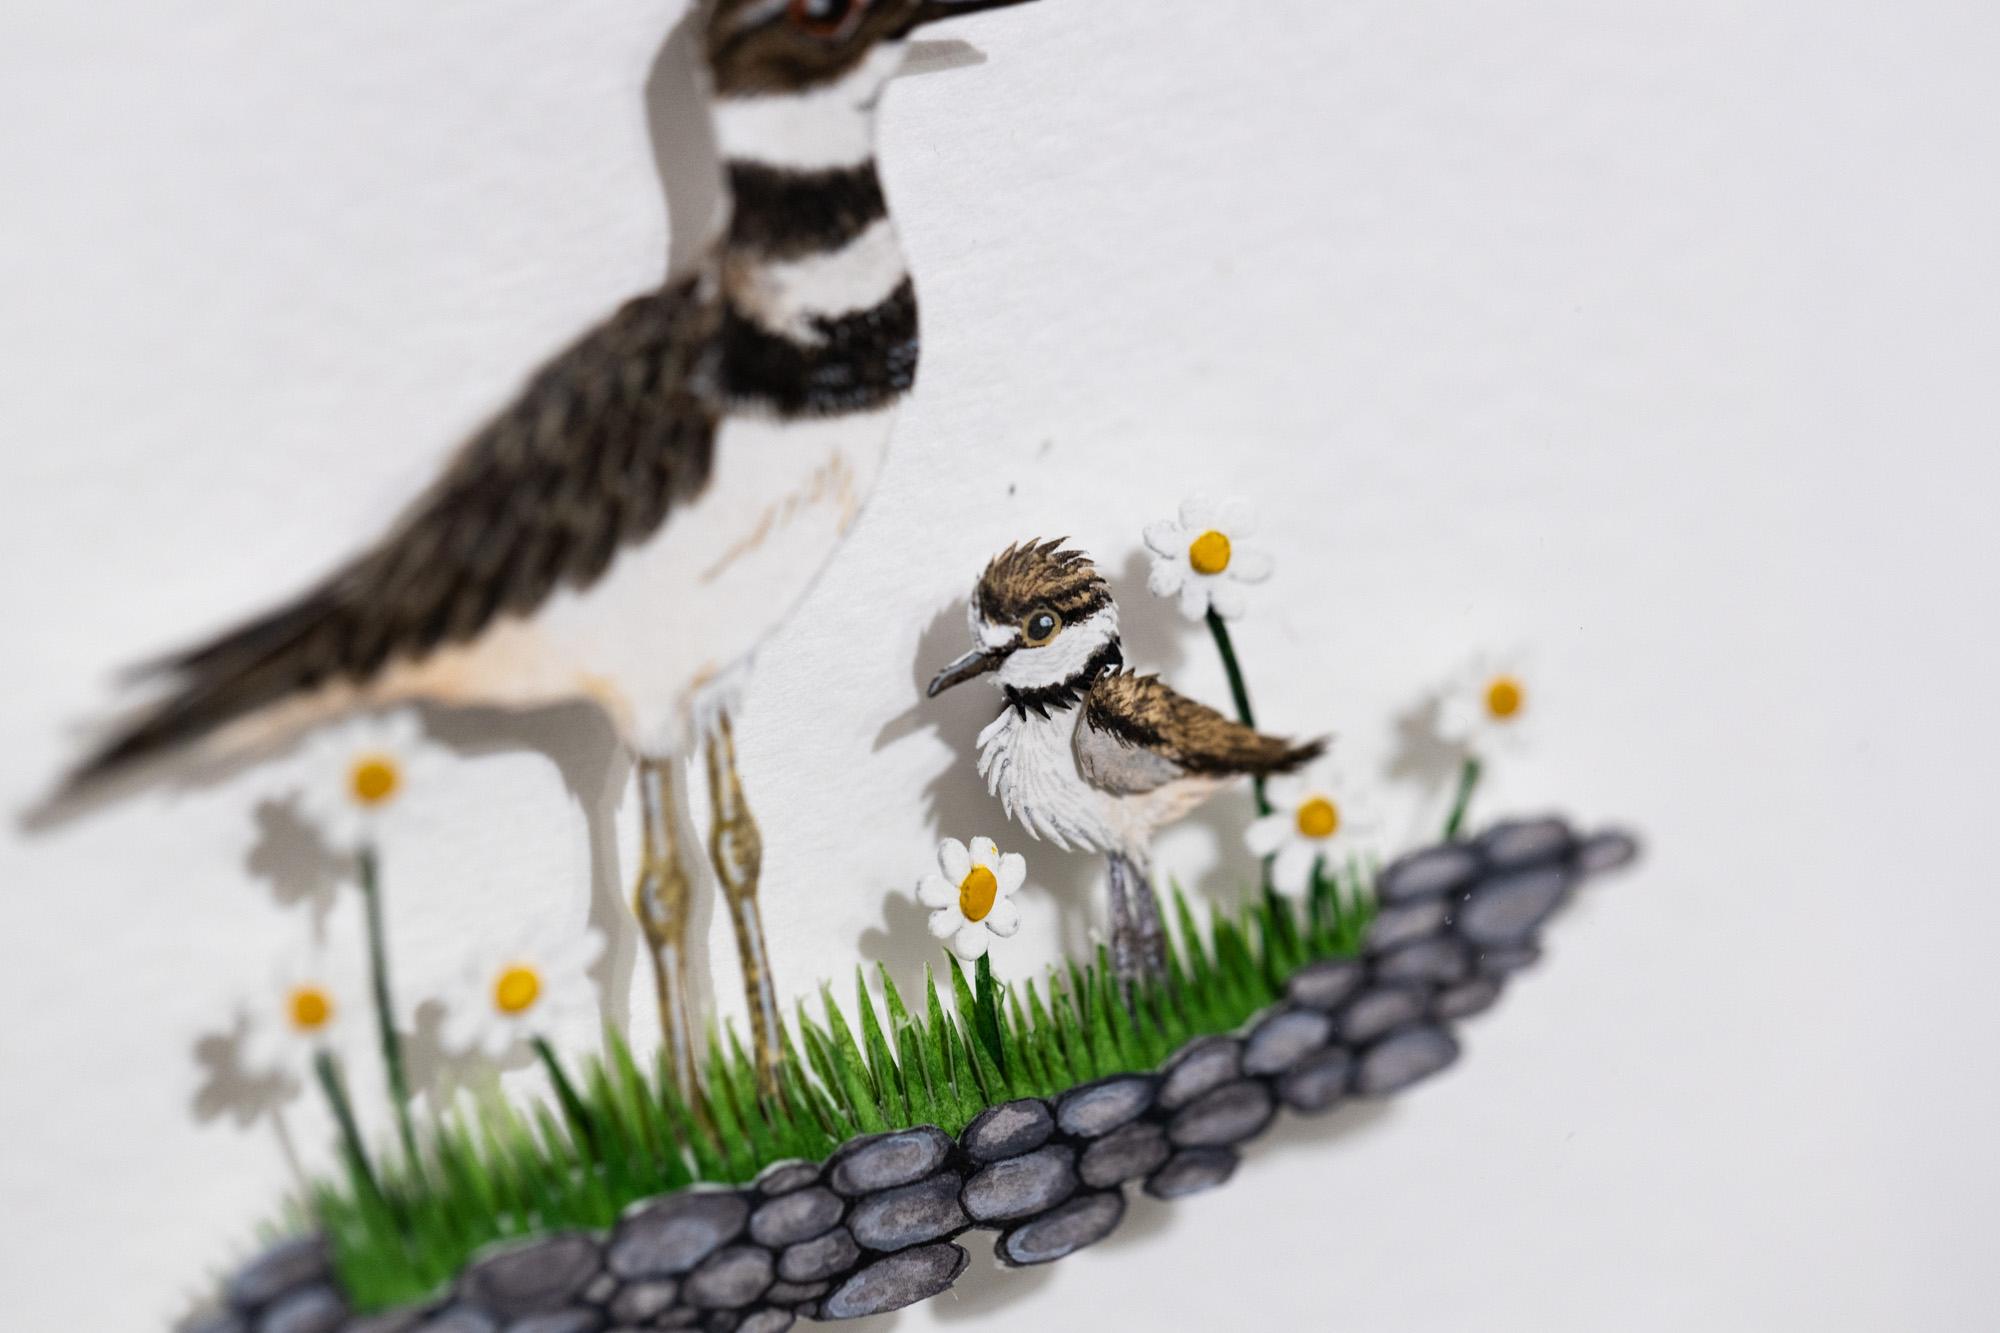 Killdeer with chick - Painting by Nayan and Venus